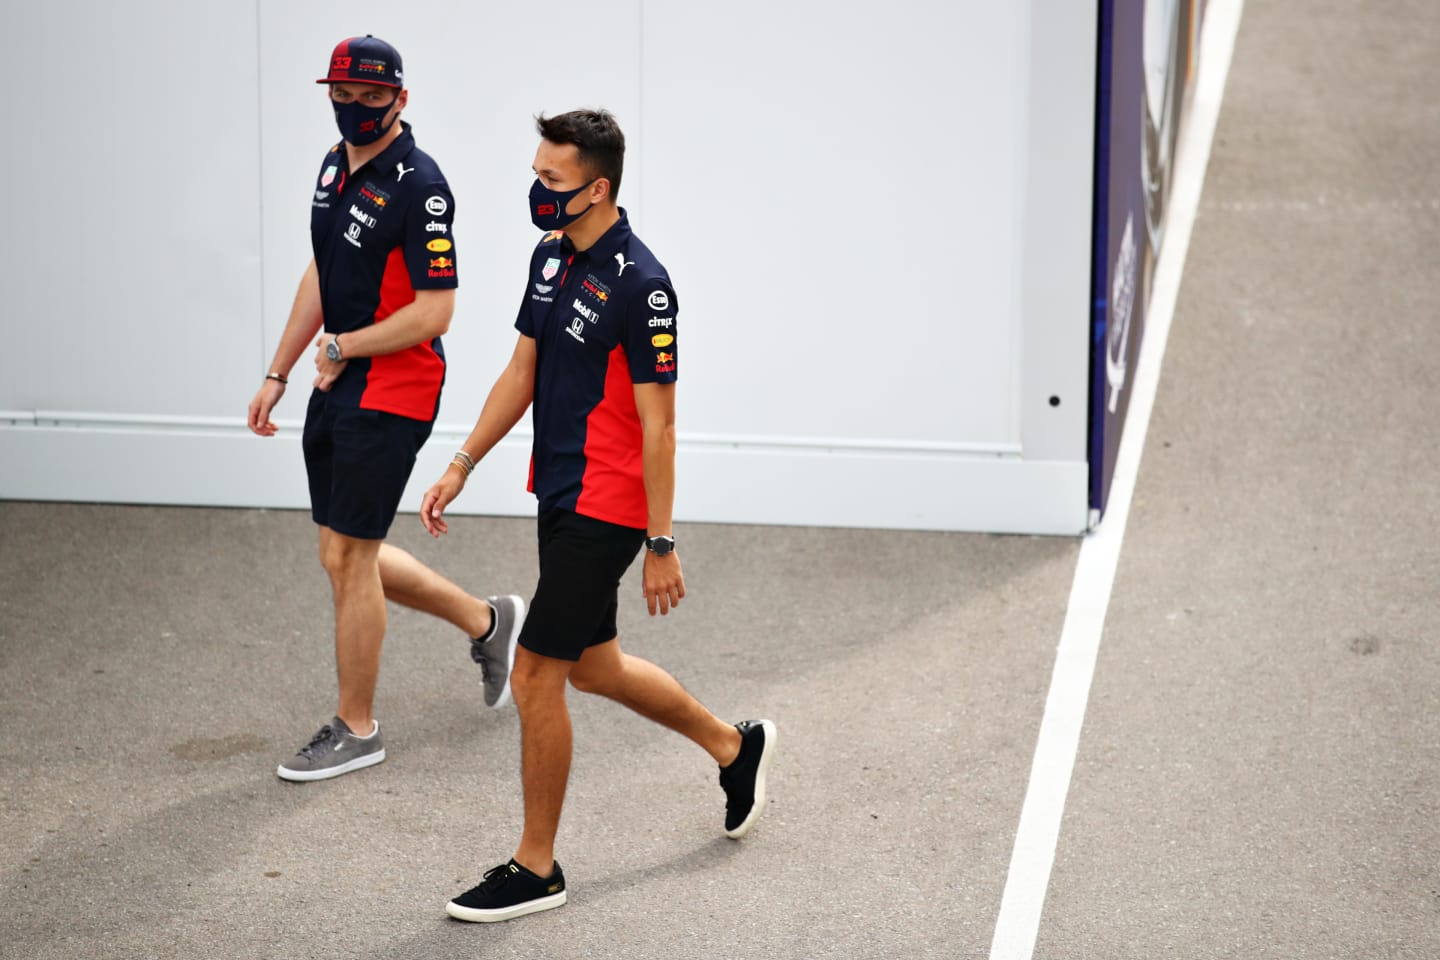 BARCELONA, SPAIN - AUGUST 13: Alexander Albon of Thailand and Red Bull Racing and Max Verstappen of